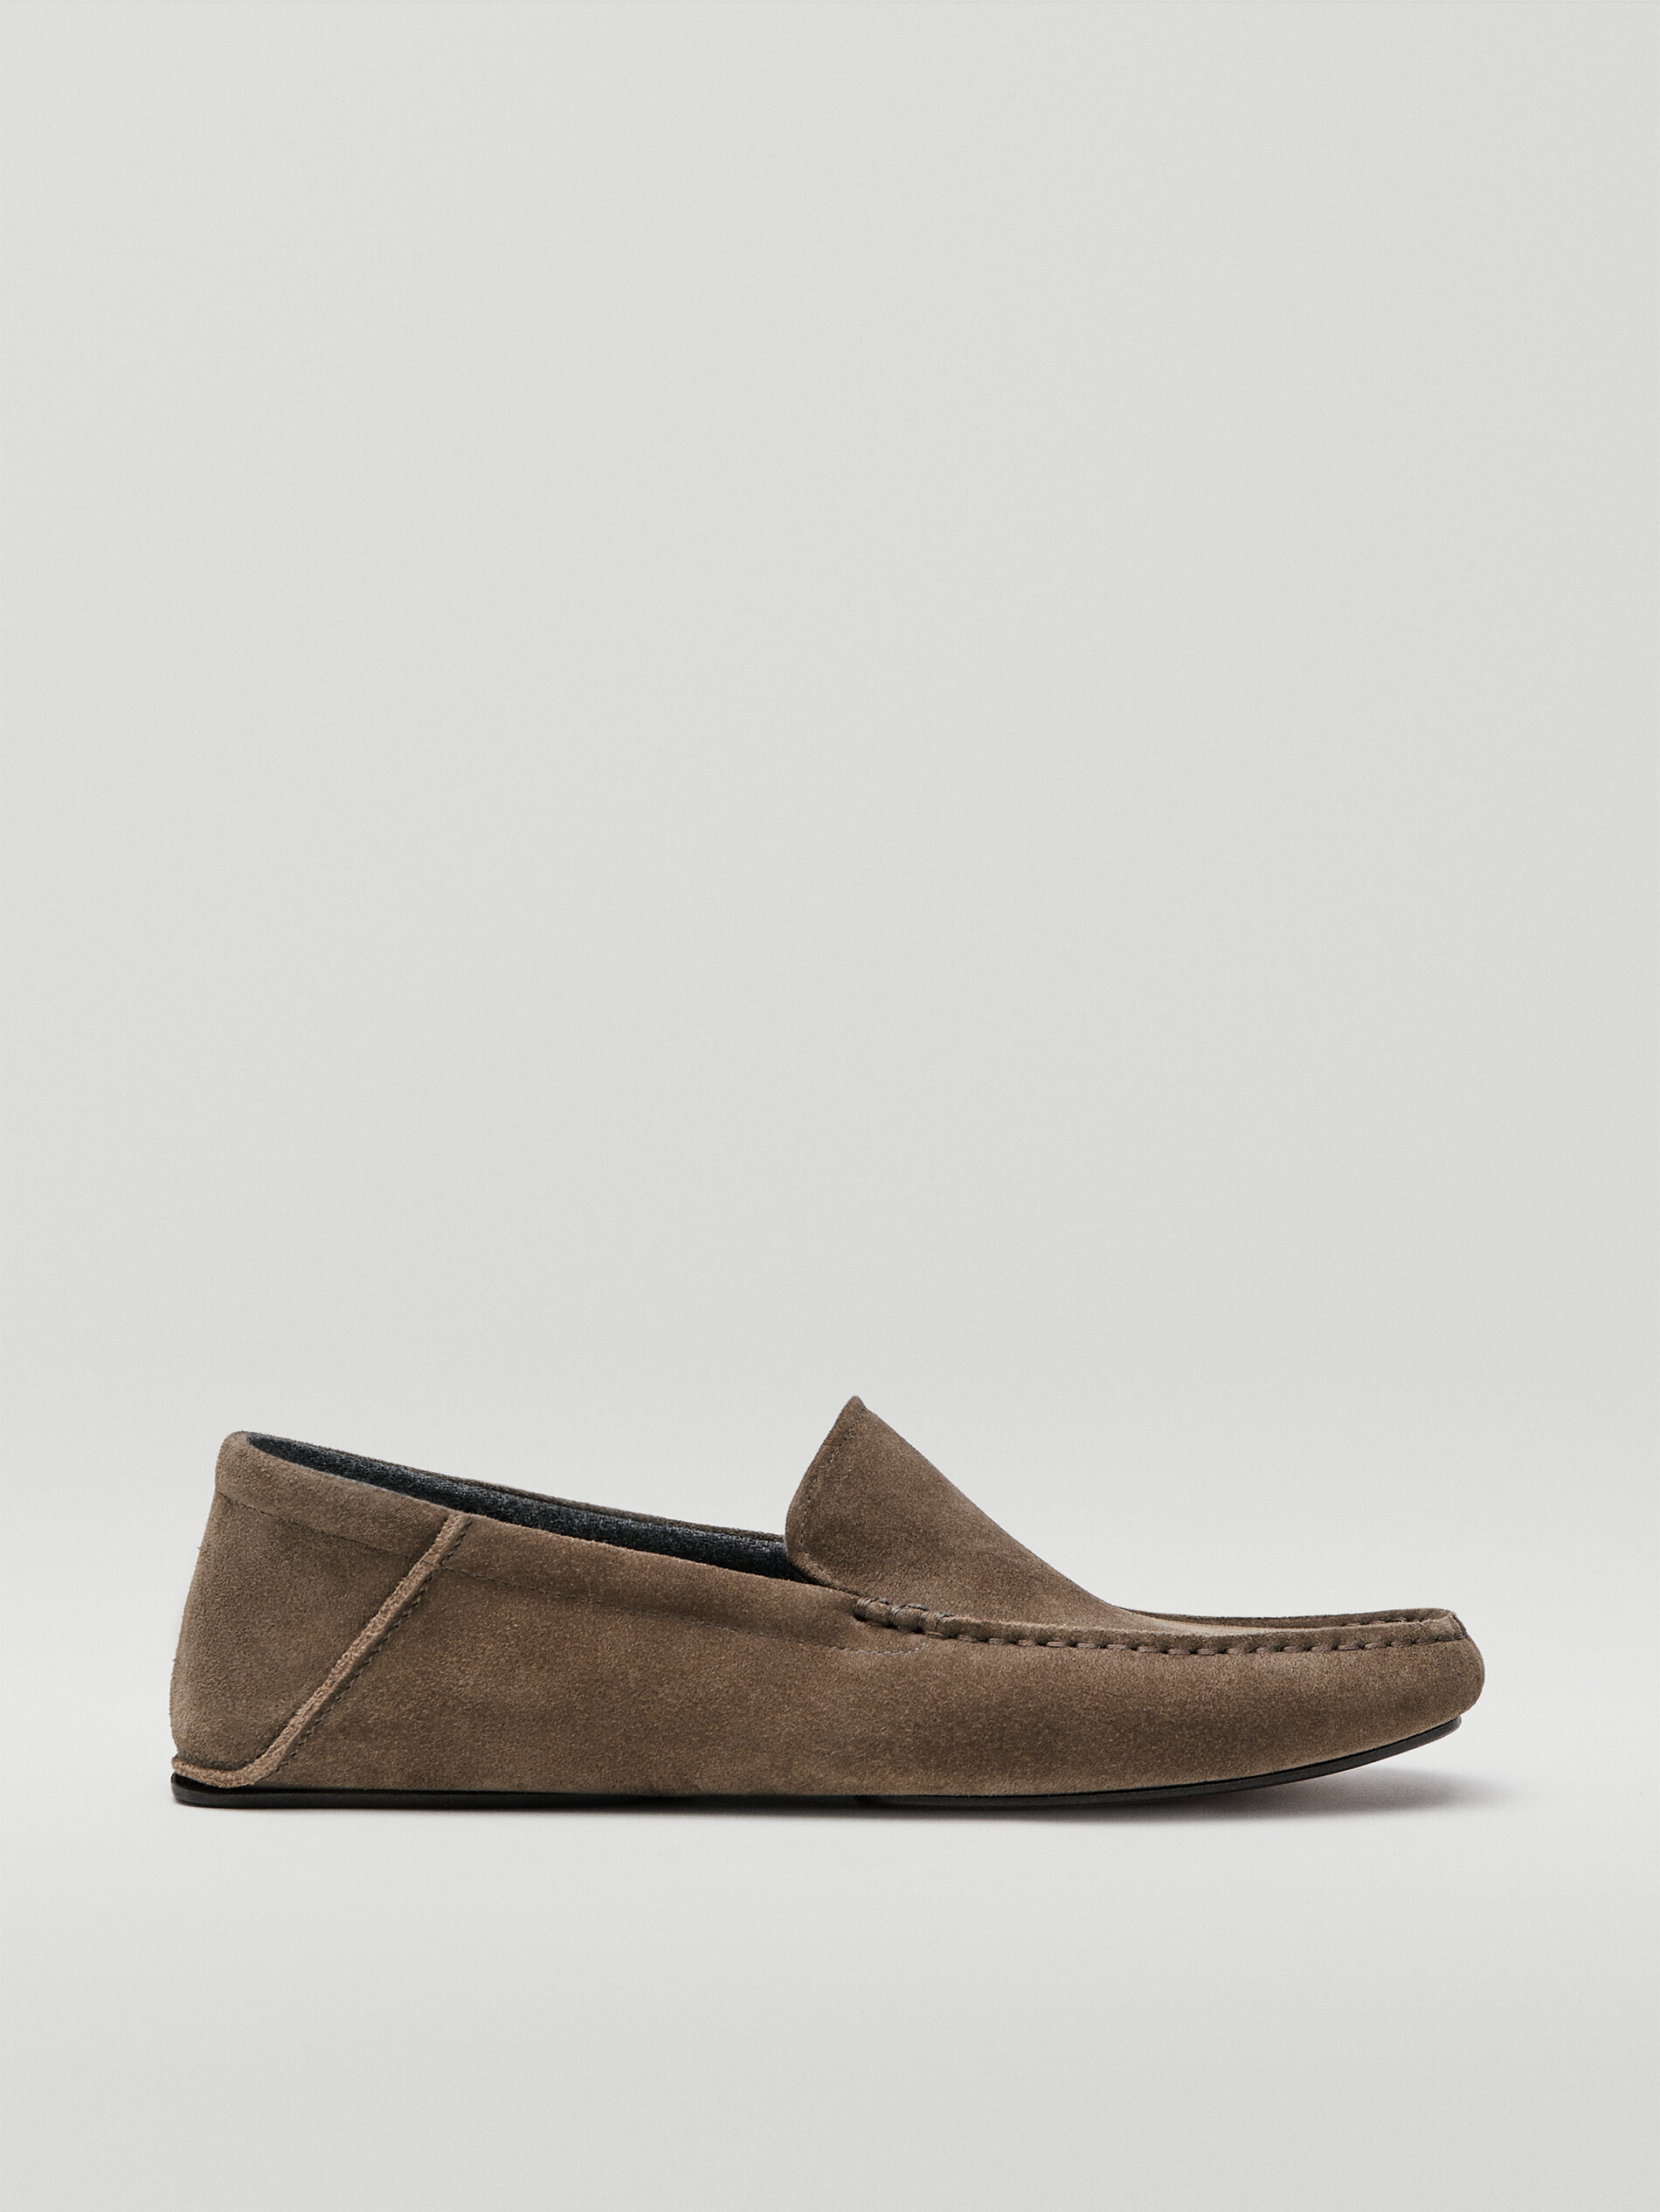 leather house shoes mens